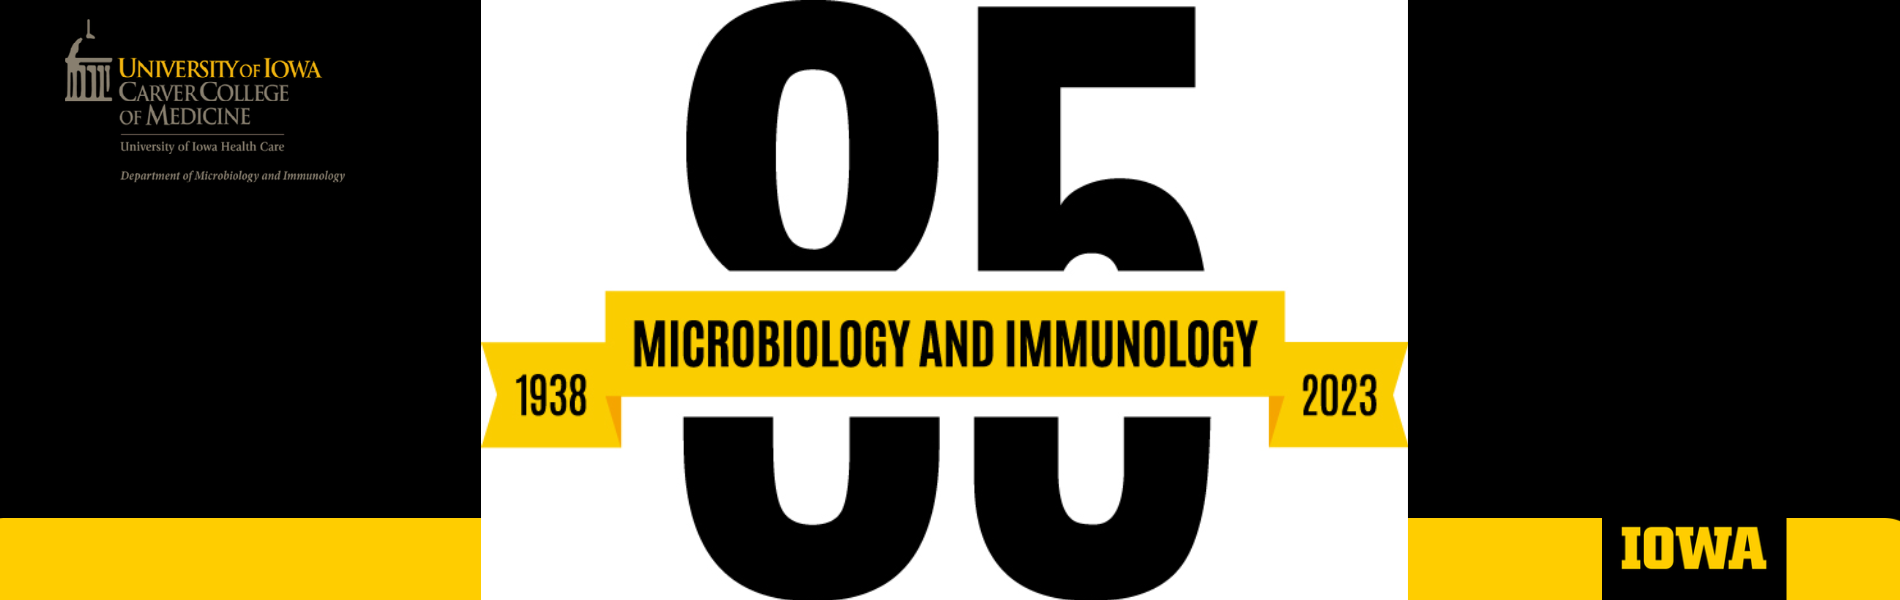 85 years of  Dept. of Microbiology and Immunology 1938 Created